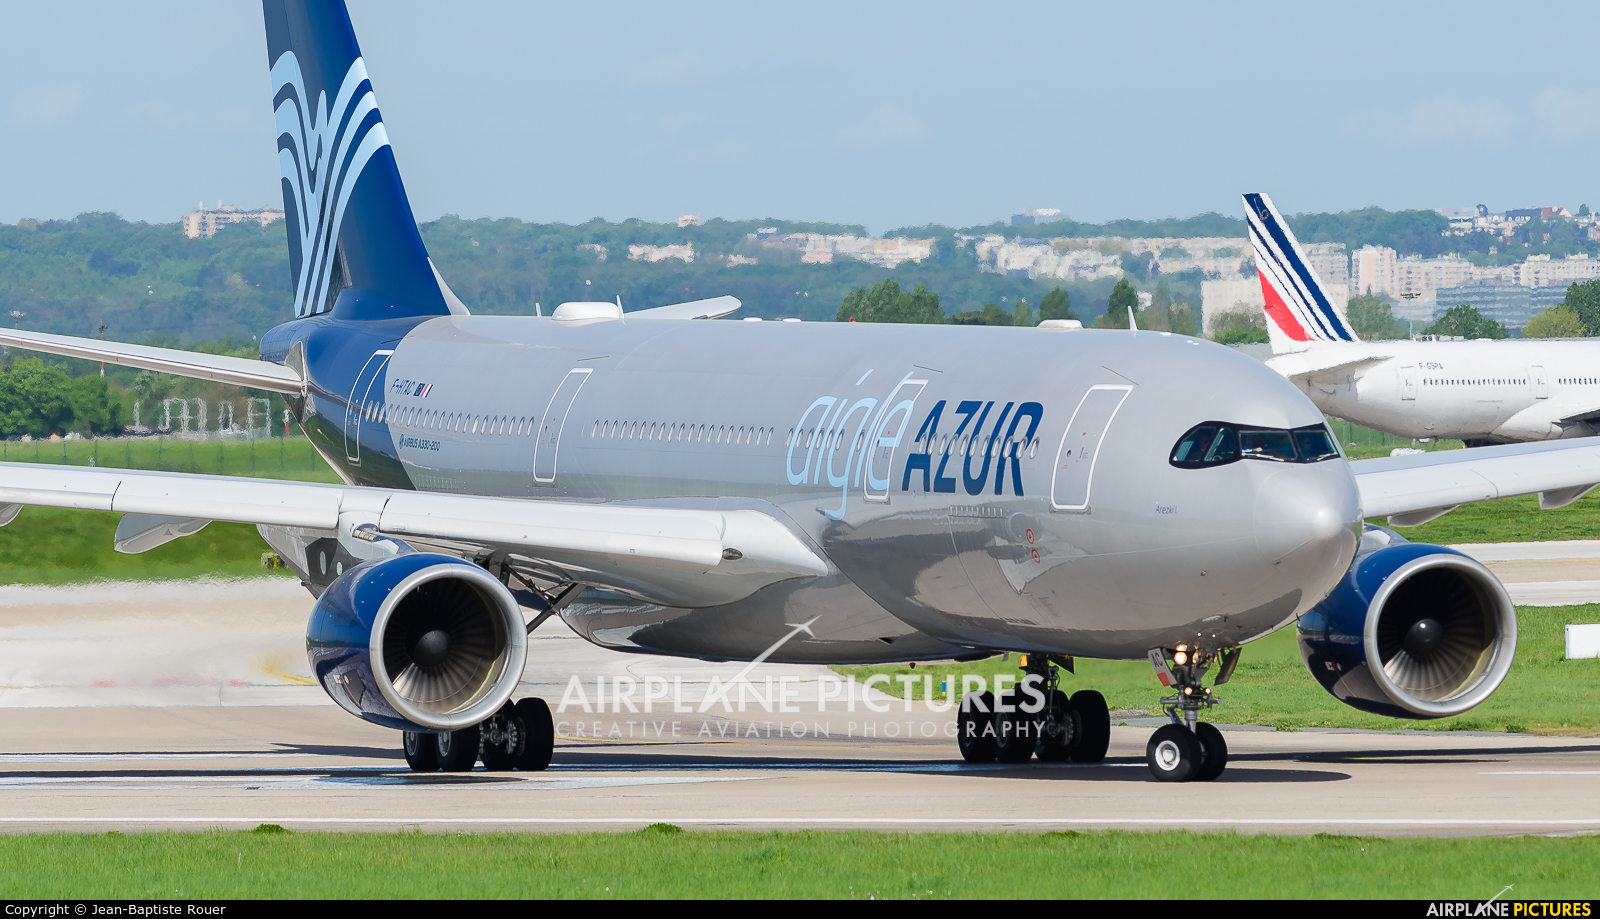 F-HTAC - Airbus A330-200 at Paris - Orly | Photo ID 1052762 | Airplane-Pictures.net